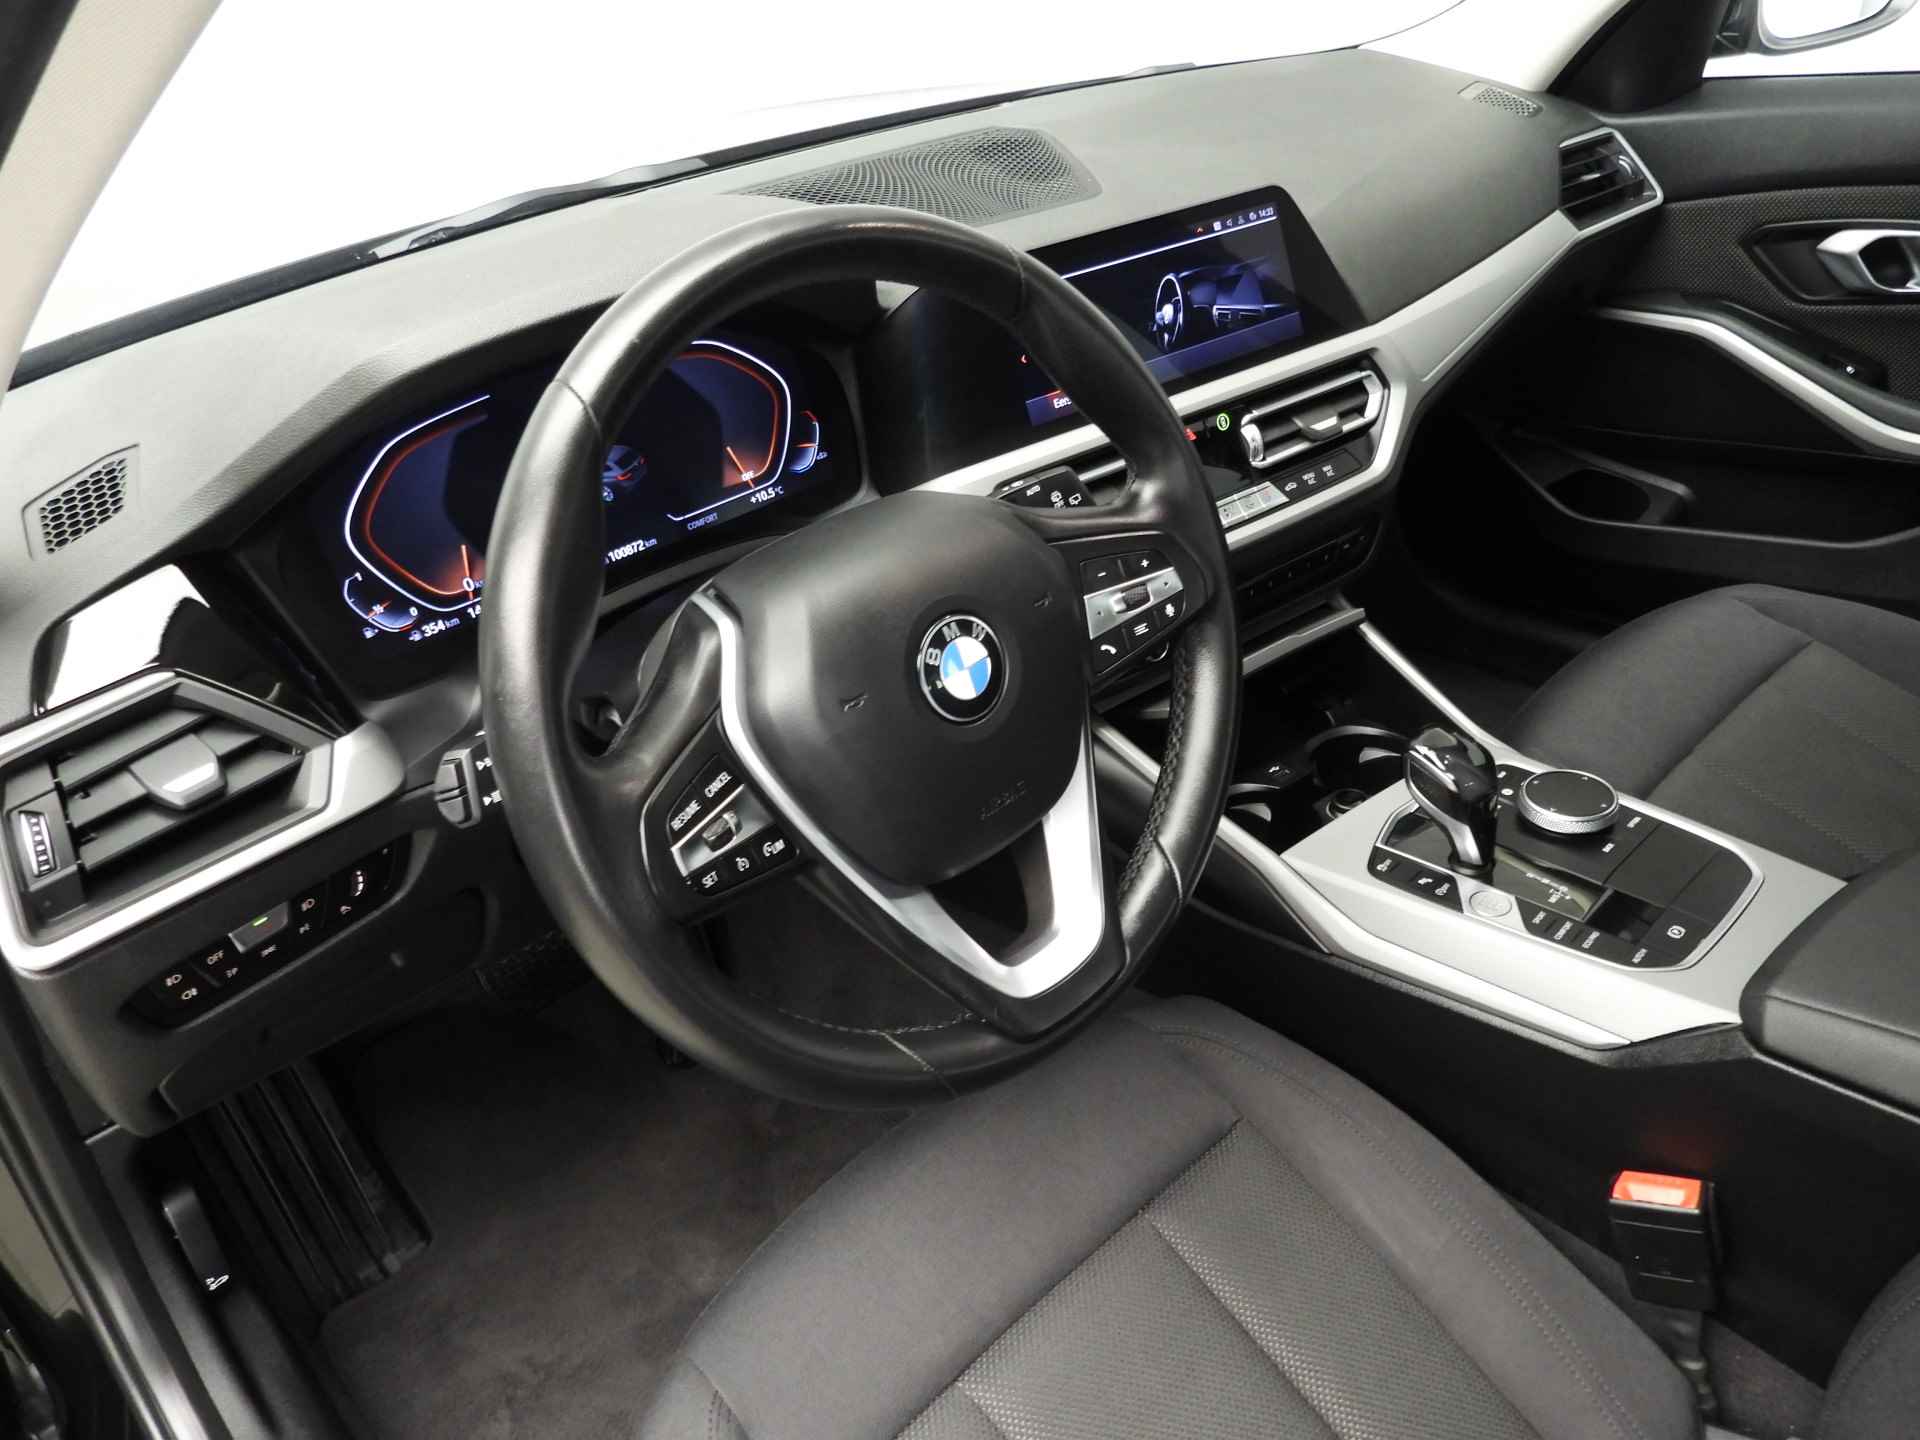 BMW 3 Serie Touring 318i LED / Navigatie / PDC / Clima / Cruise contole / DAB / Alu 17 inch - 7/35